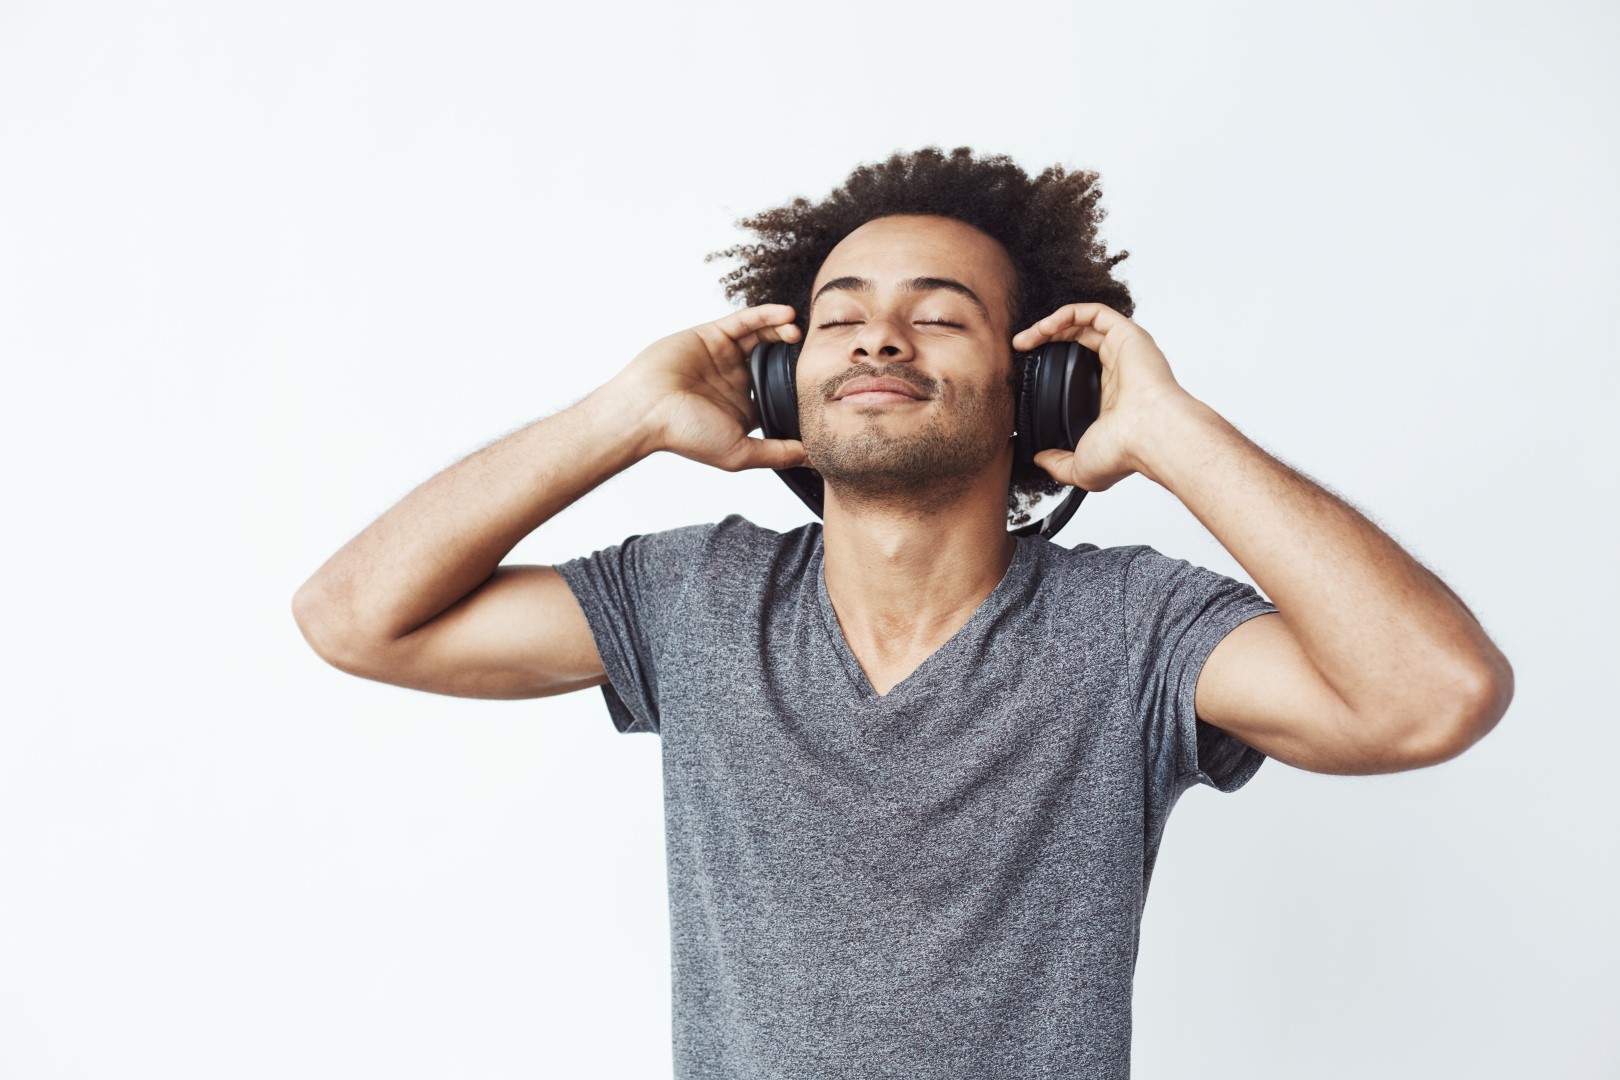 WHY DO WE GET CHILLS WHEN LISTENING TO MUSIC?